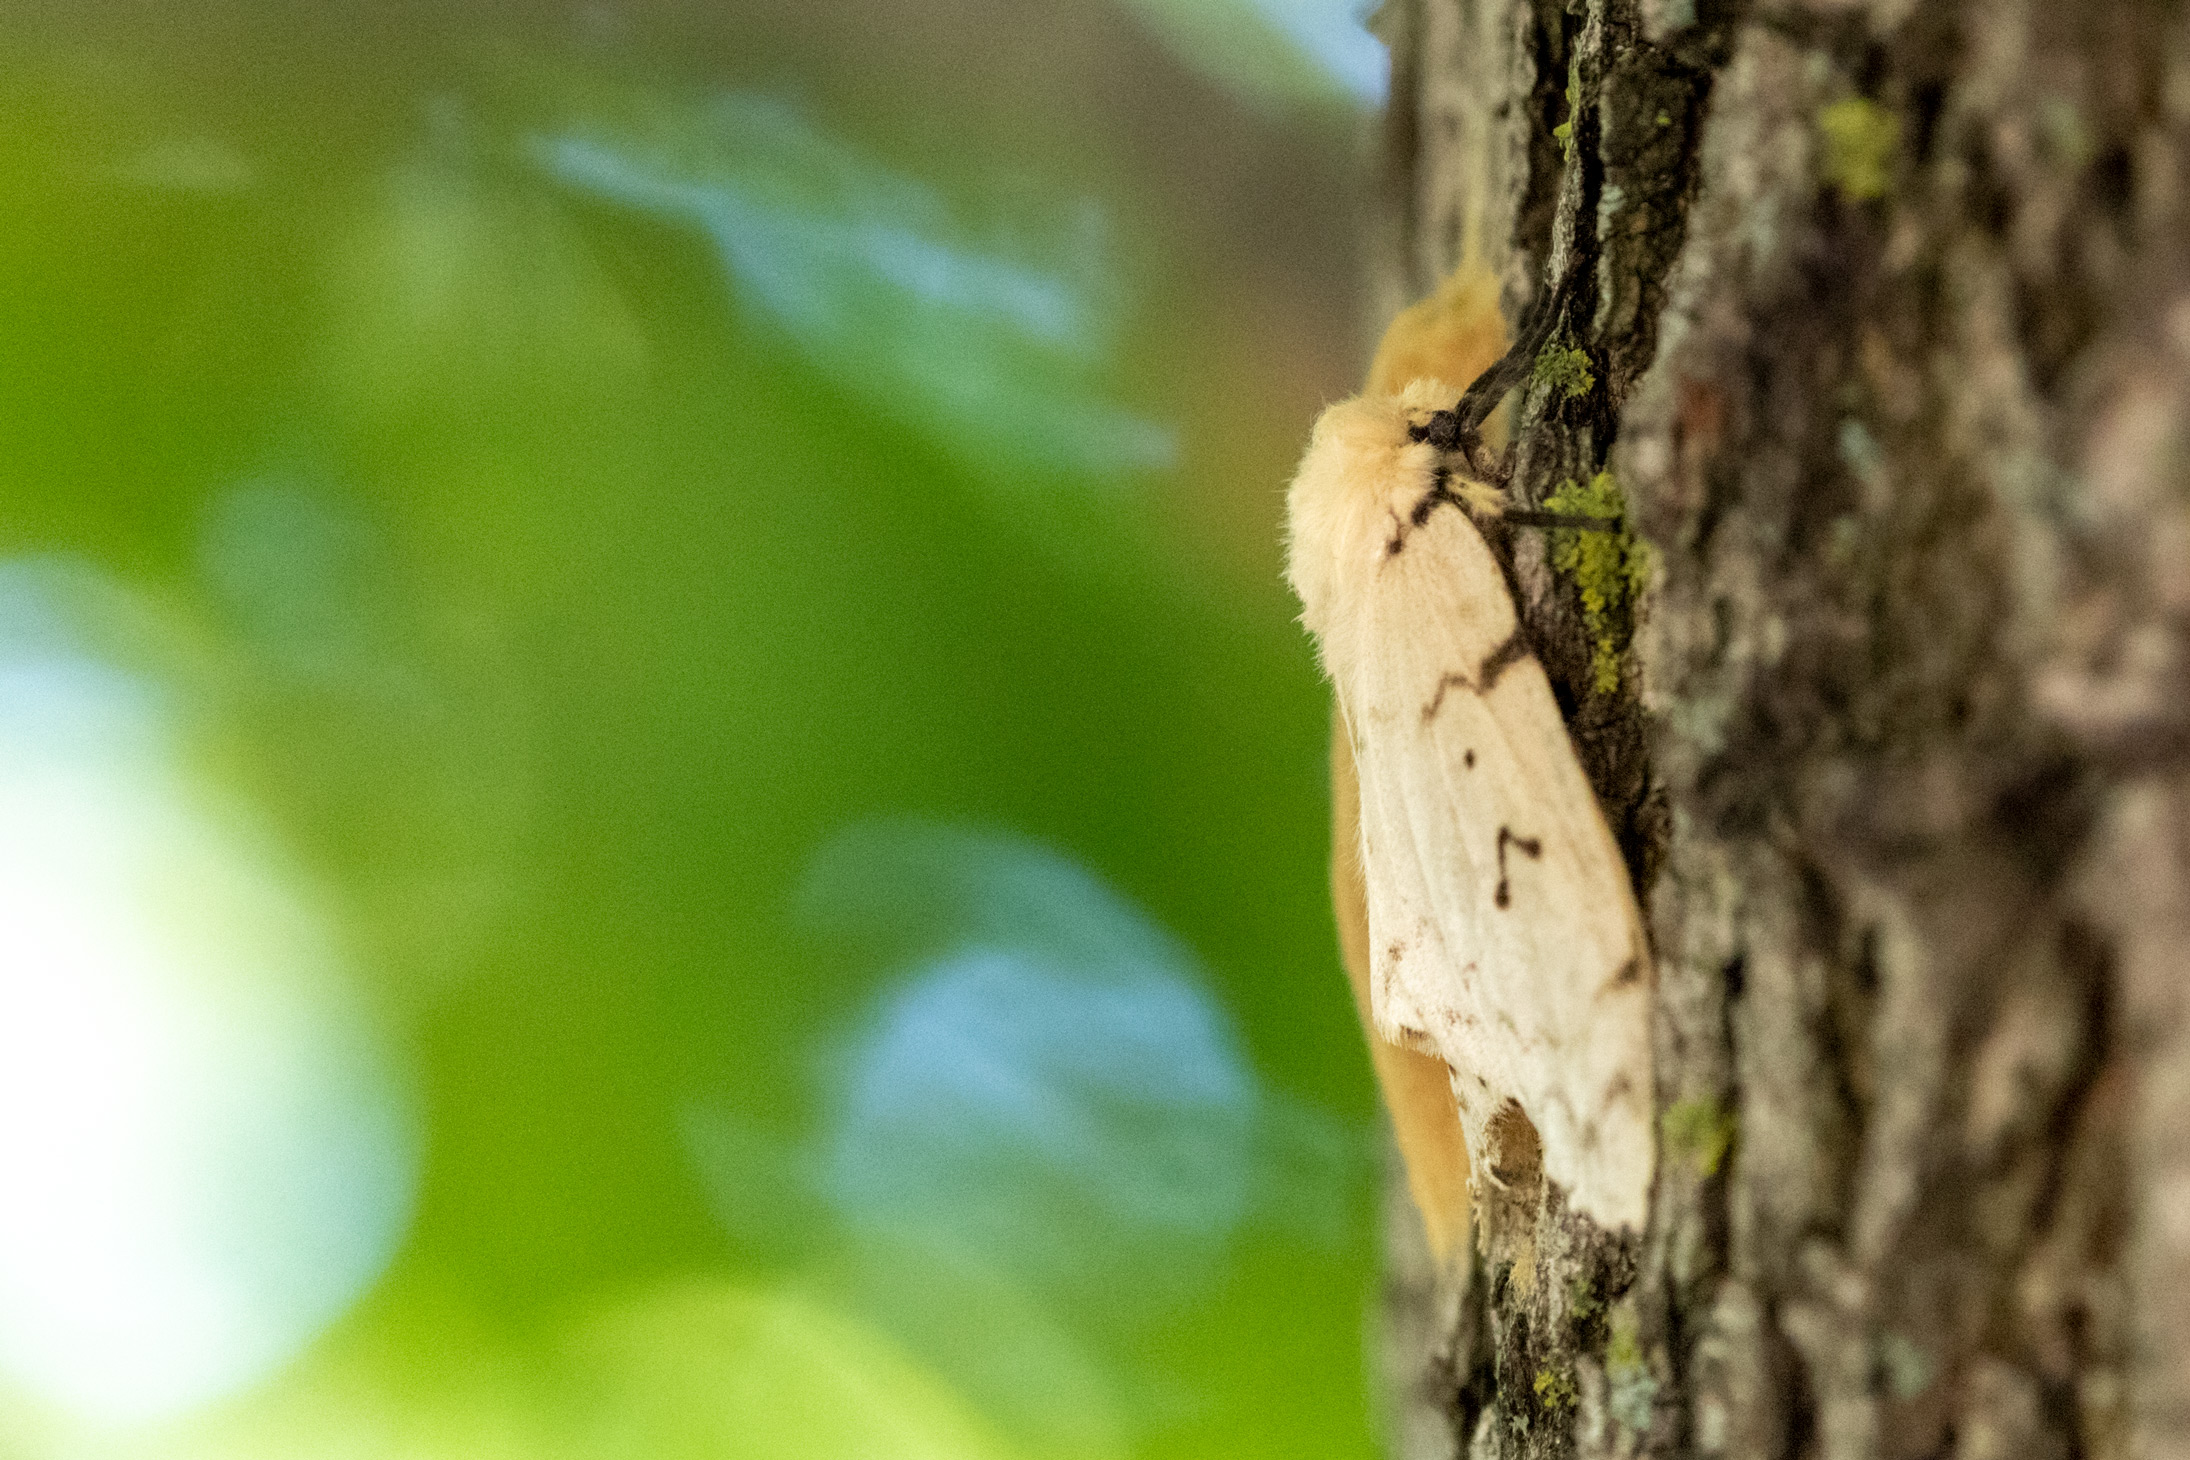 Tan moth with black stripes/spots clinging to tree bark